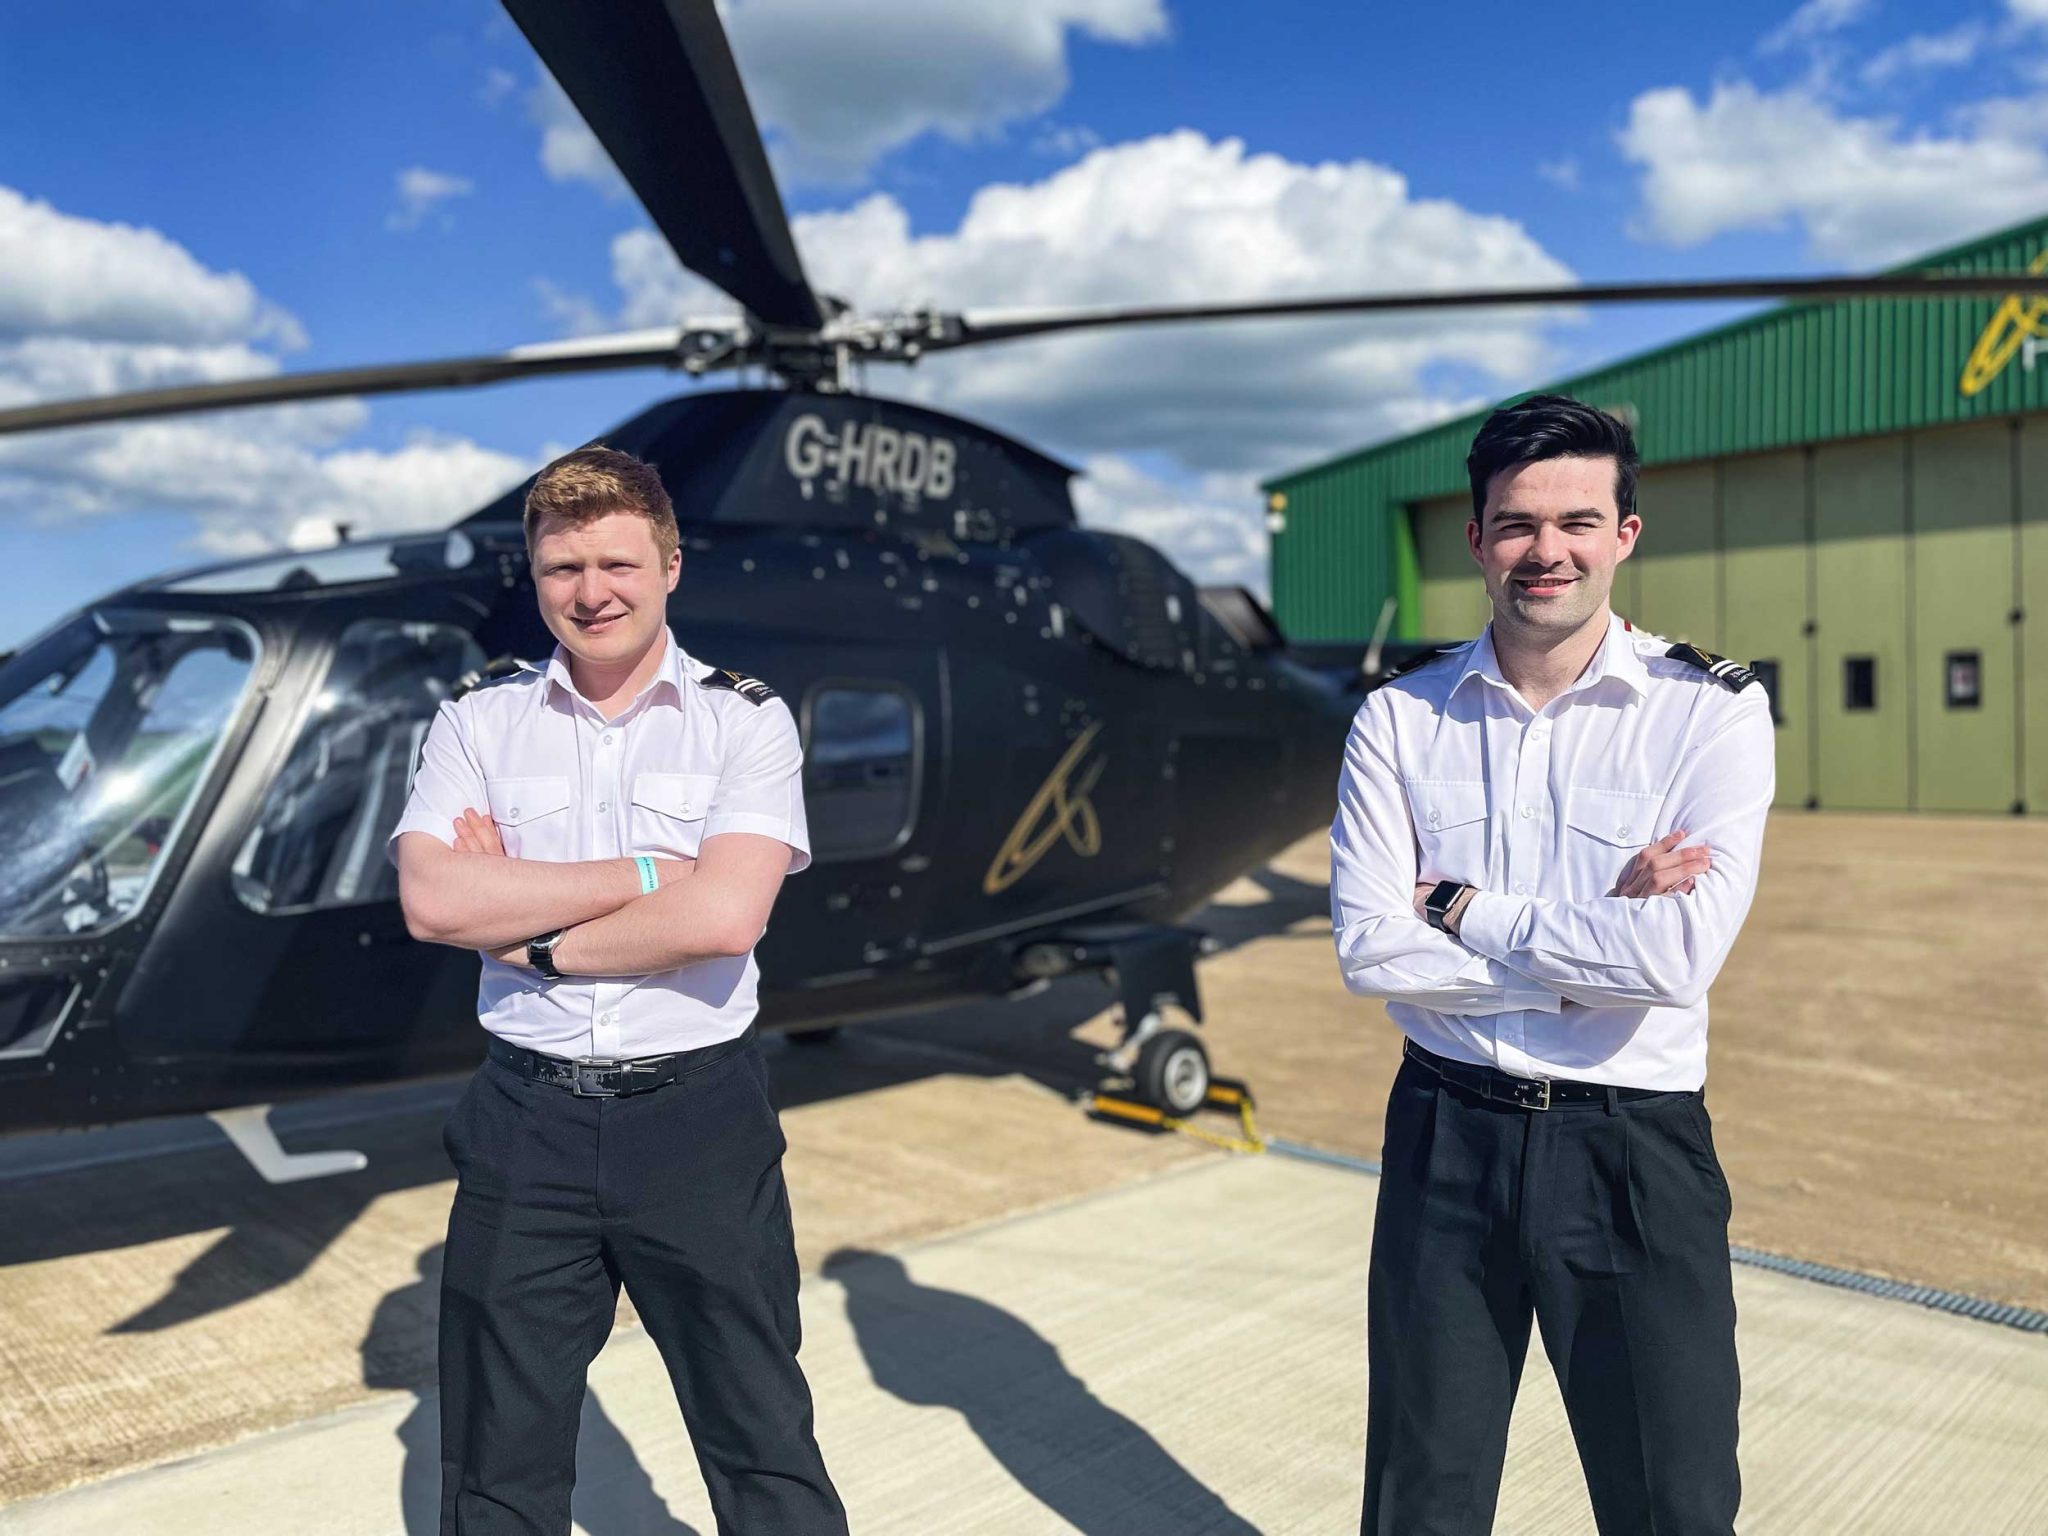 bristow-helicopters-launches-fully-sponsored-commercial-pilot-course-pilot-career-news-pilot